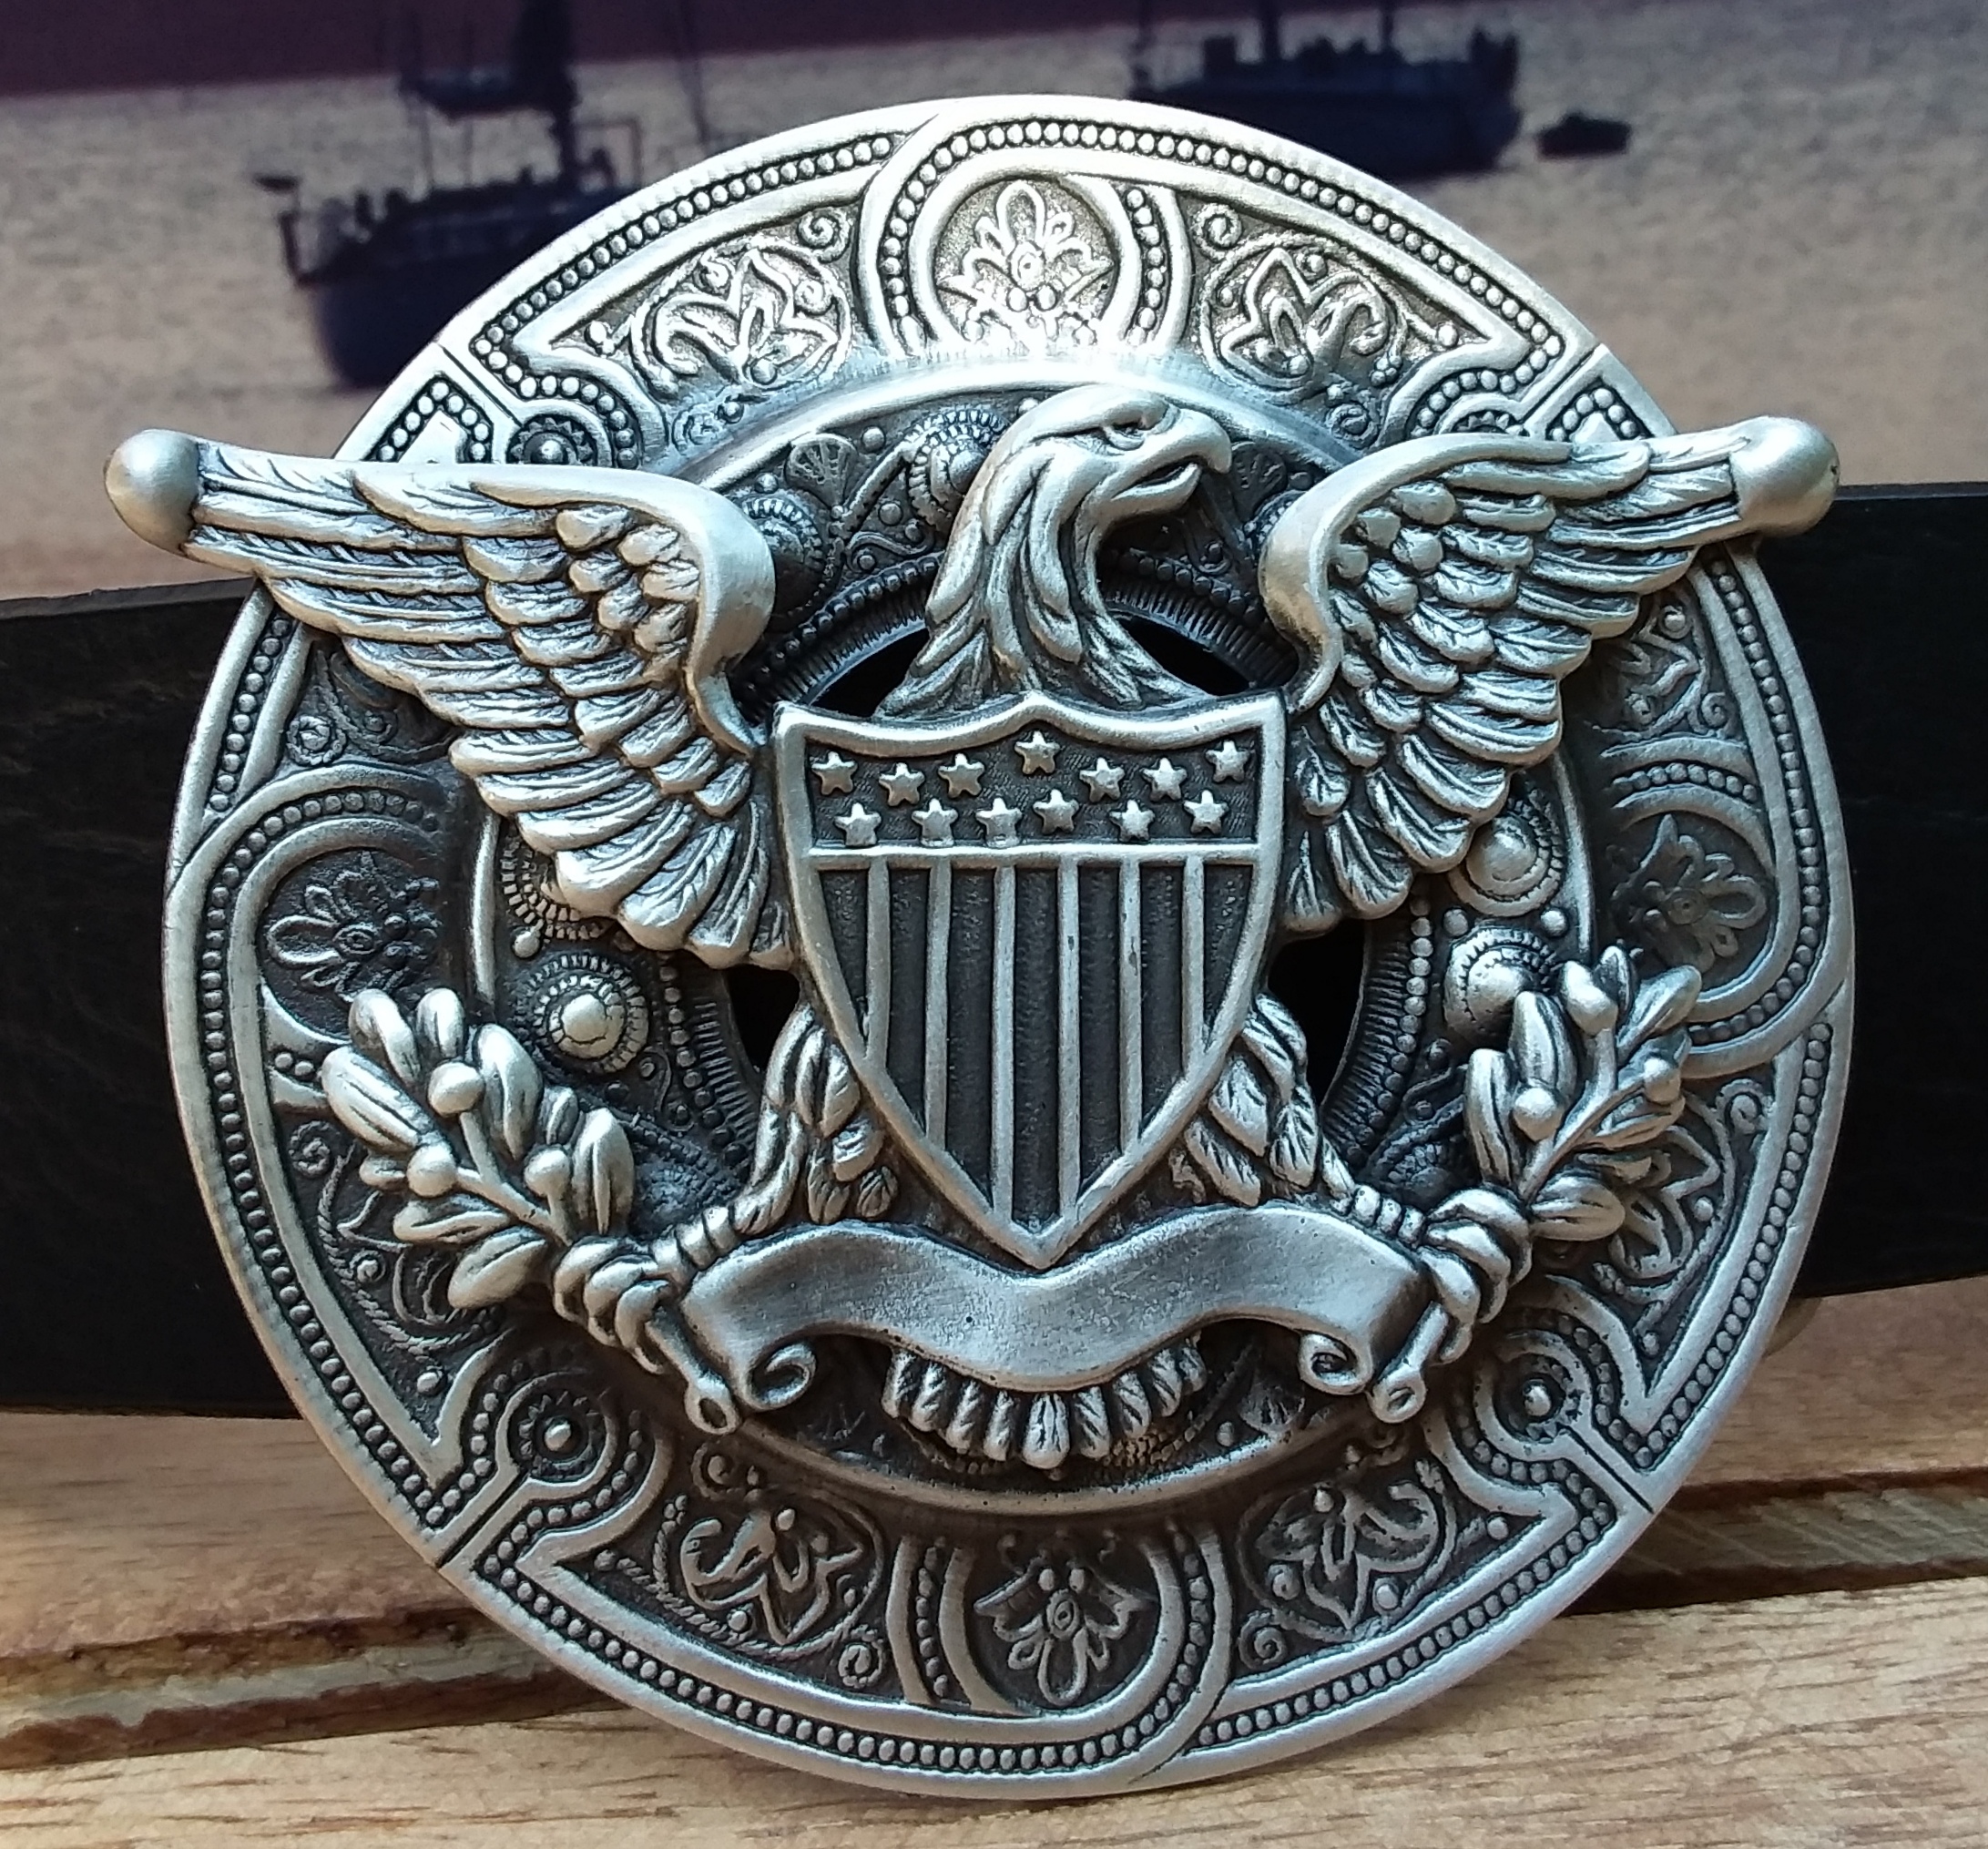 American Eagle head buckle in old brass finish